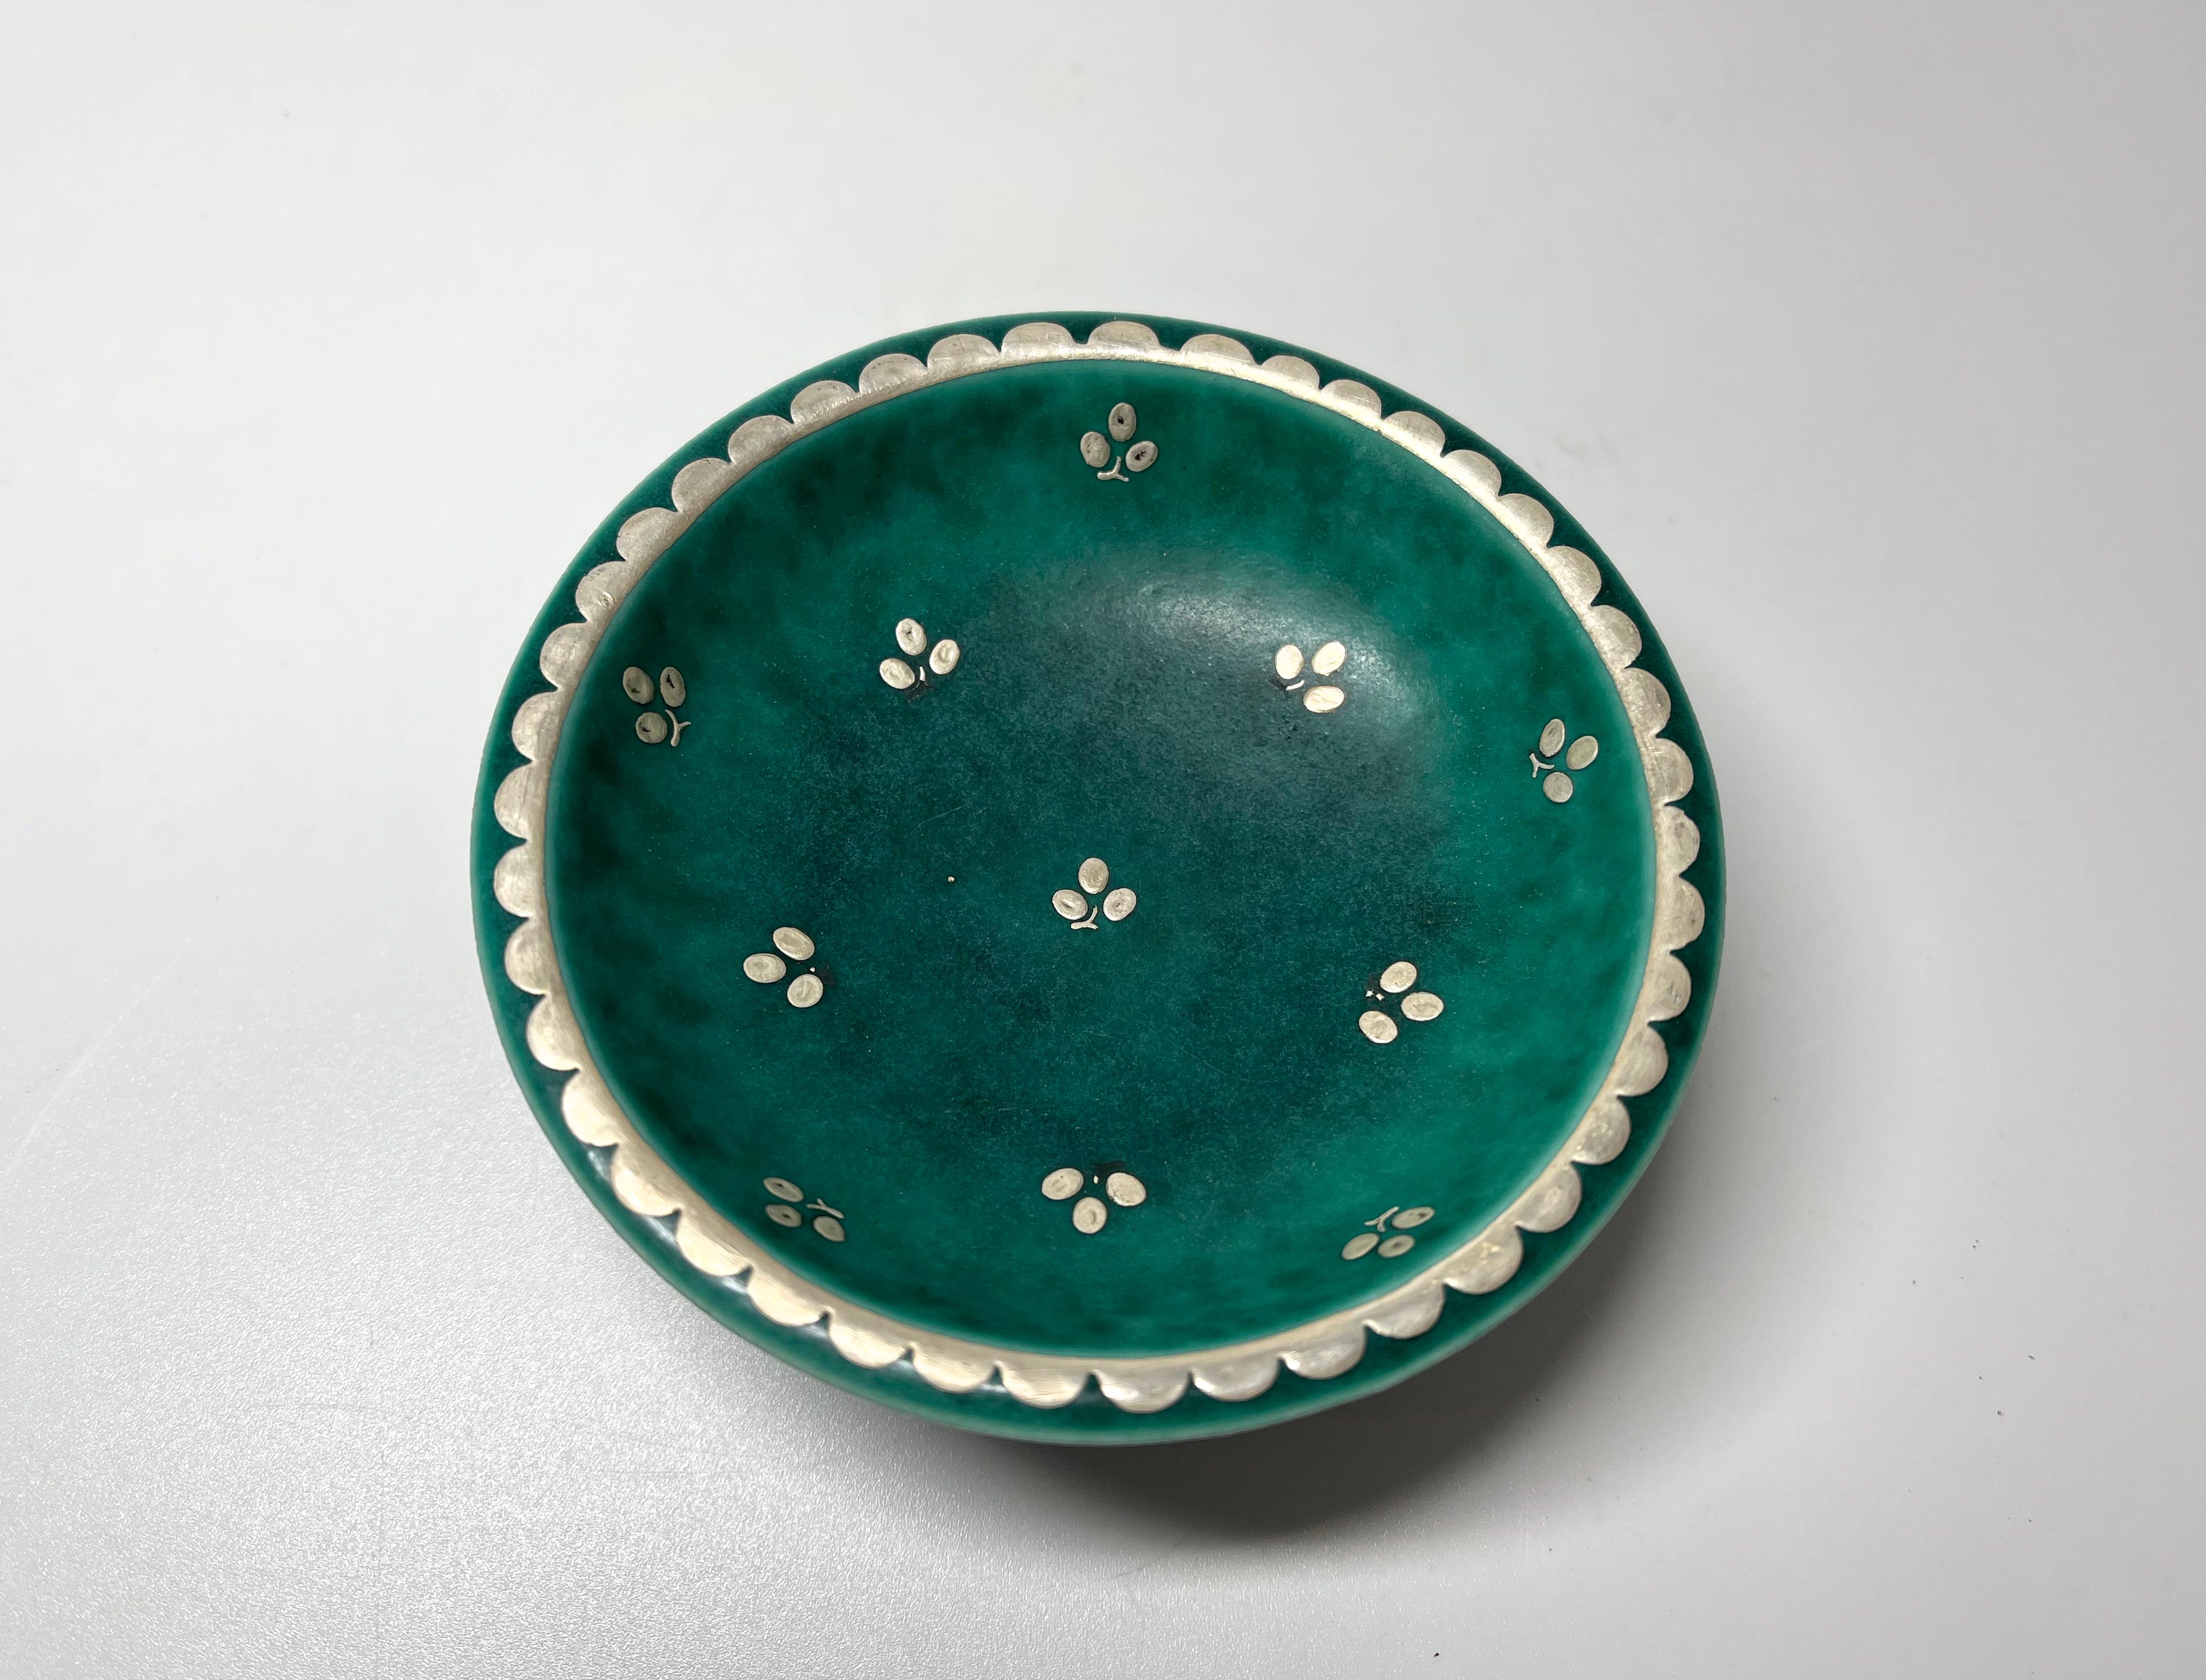 Glazed Introduction To Wilhelm Kage, Small Footed Stoneware Applied Silver Floral Dish